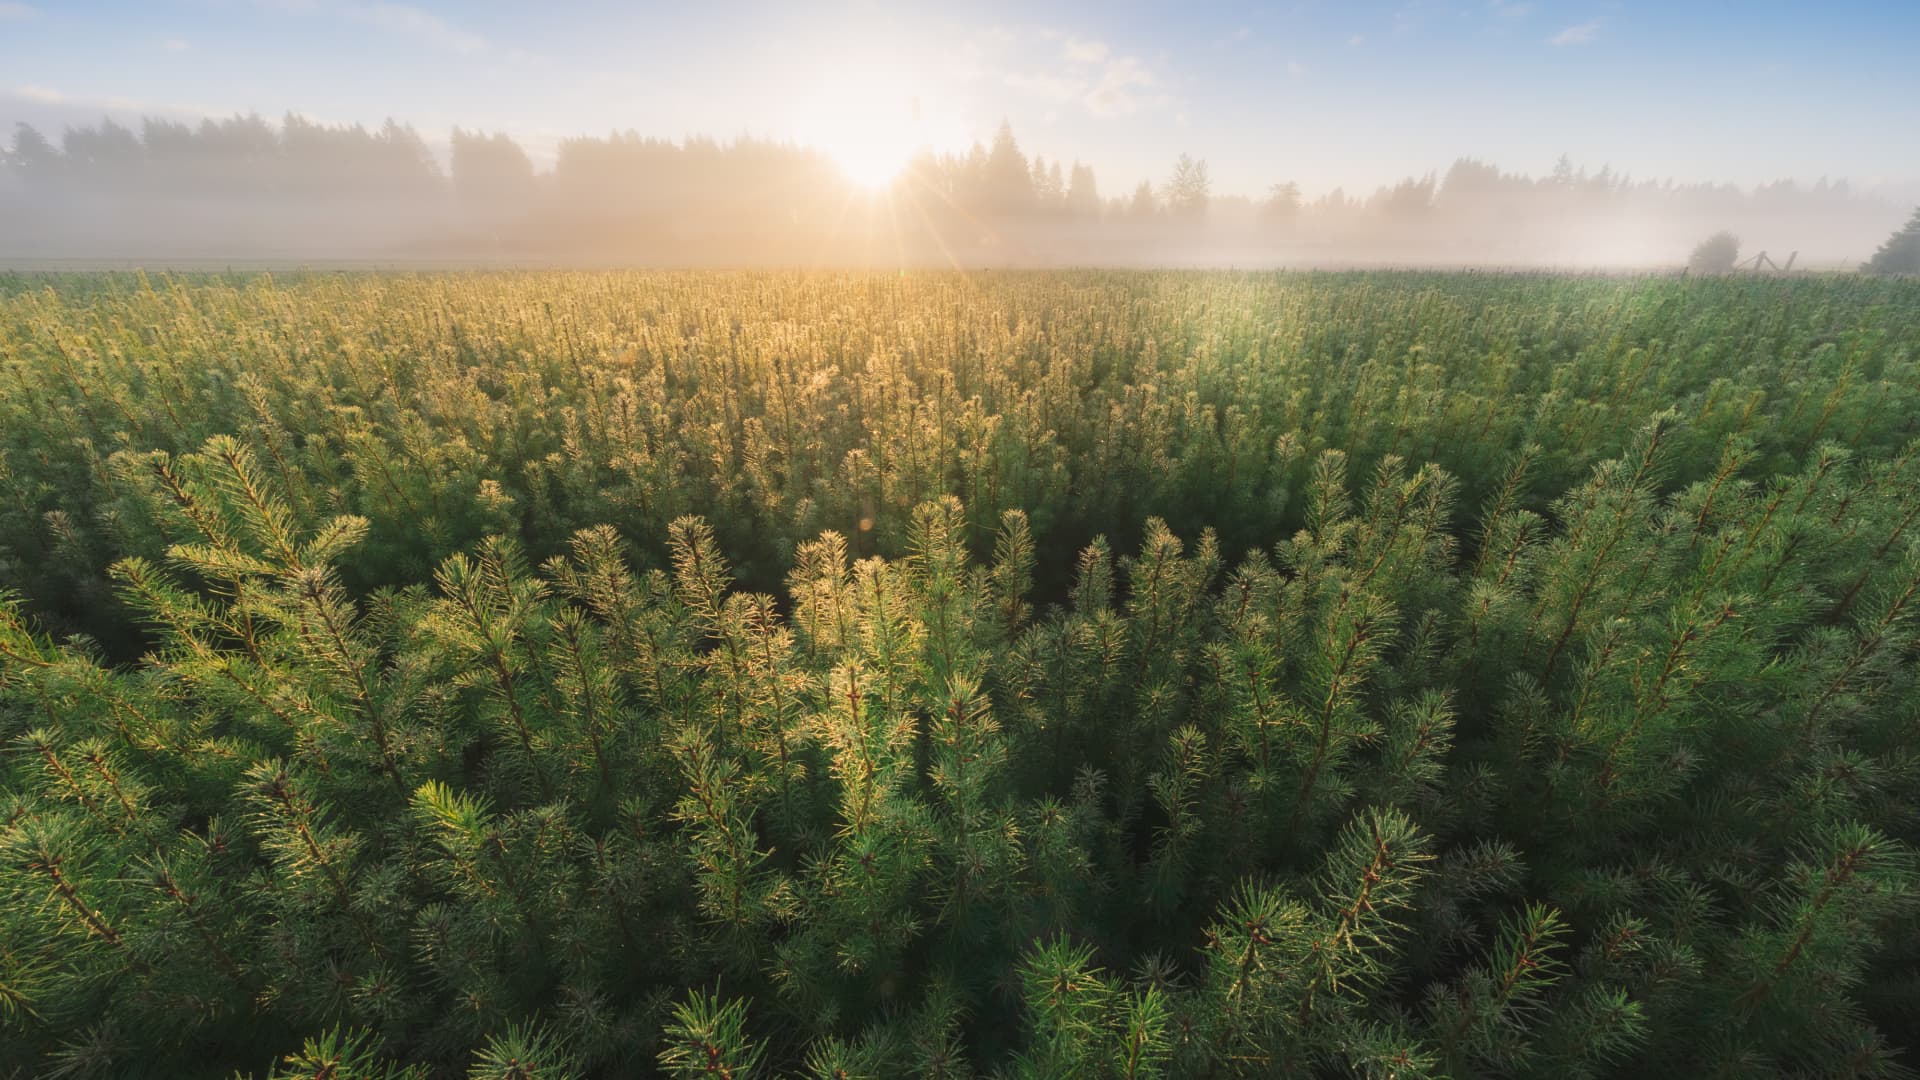 Mast Reforestation is using drones, nurseries and carbon offsets to revitalize land after wildfires